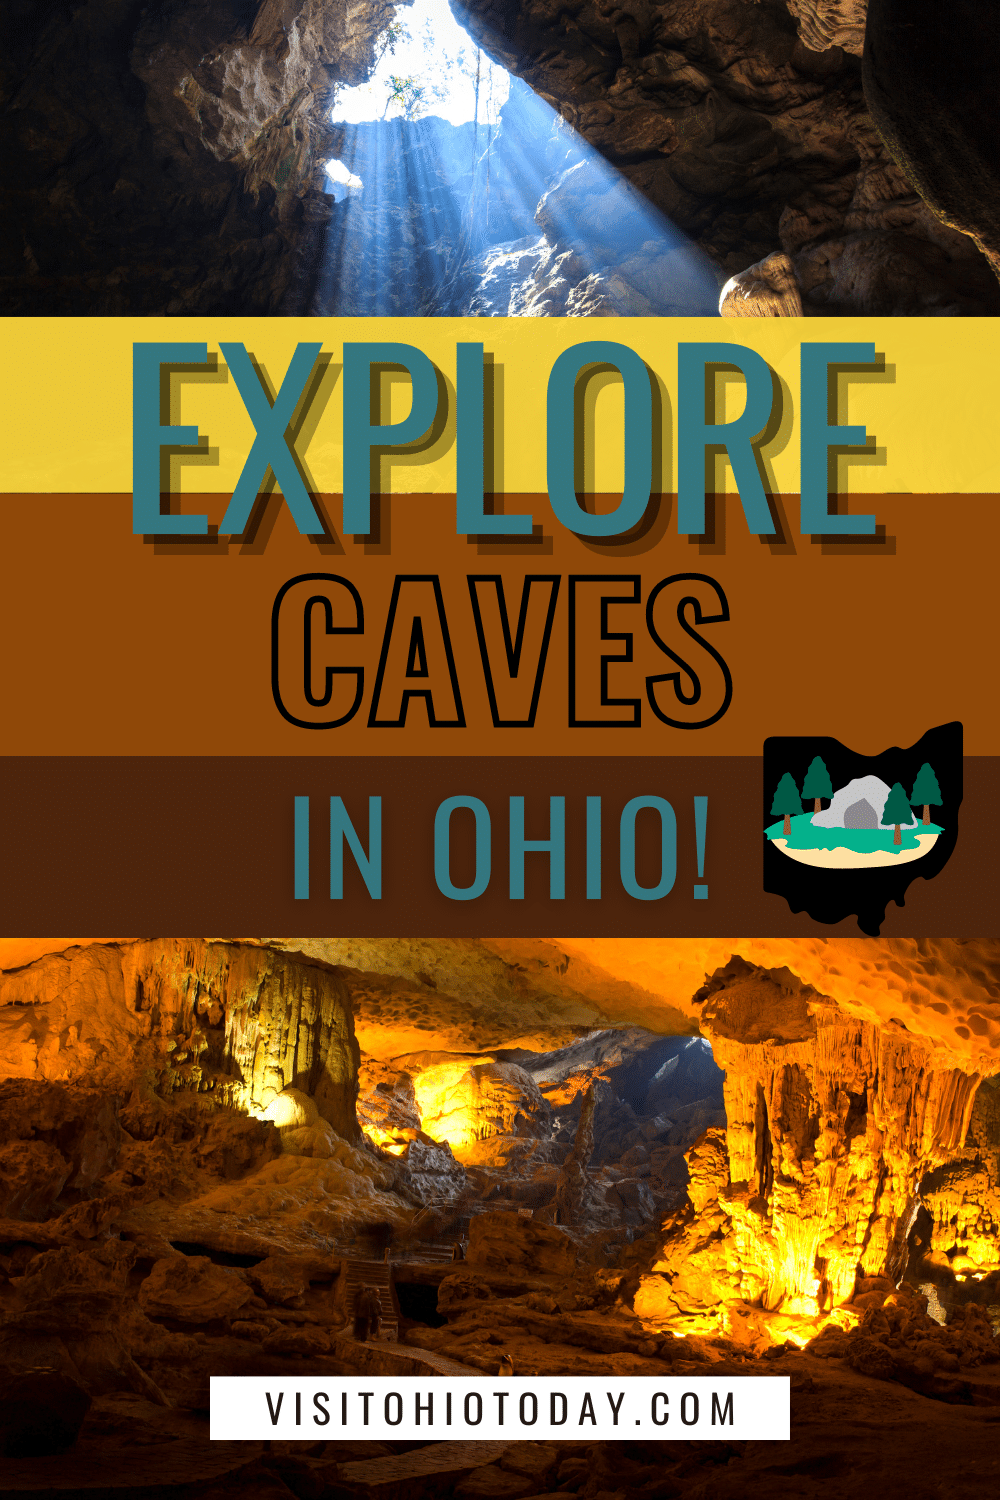 Ohio has some of the most amazing natural beauty in the American Midwest. Some of the caves that are situated around this state are simply stunning and will provide memories for years to come. It isn't just the caves that are amazing, the countryside that the caves are located in is stunning as well and at all times of the year as well. Here are 9 of the most stunning caves in Ohio, so if you want to get some caving done, we can help! Caves In Ohio | Visit Ohio Today | Ohio Adventures